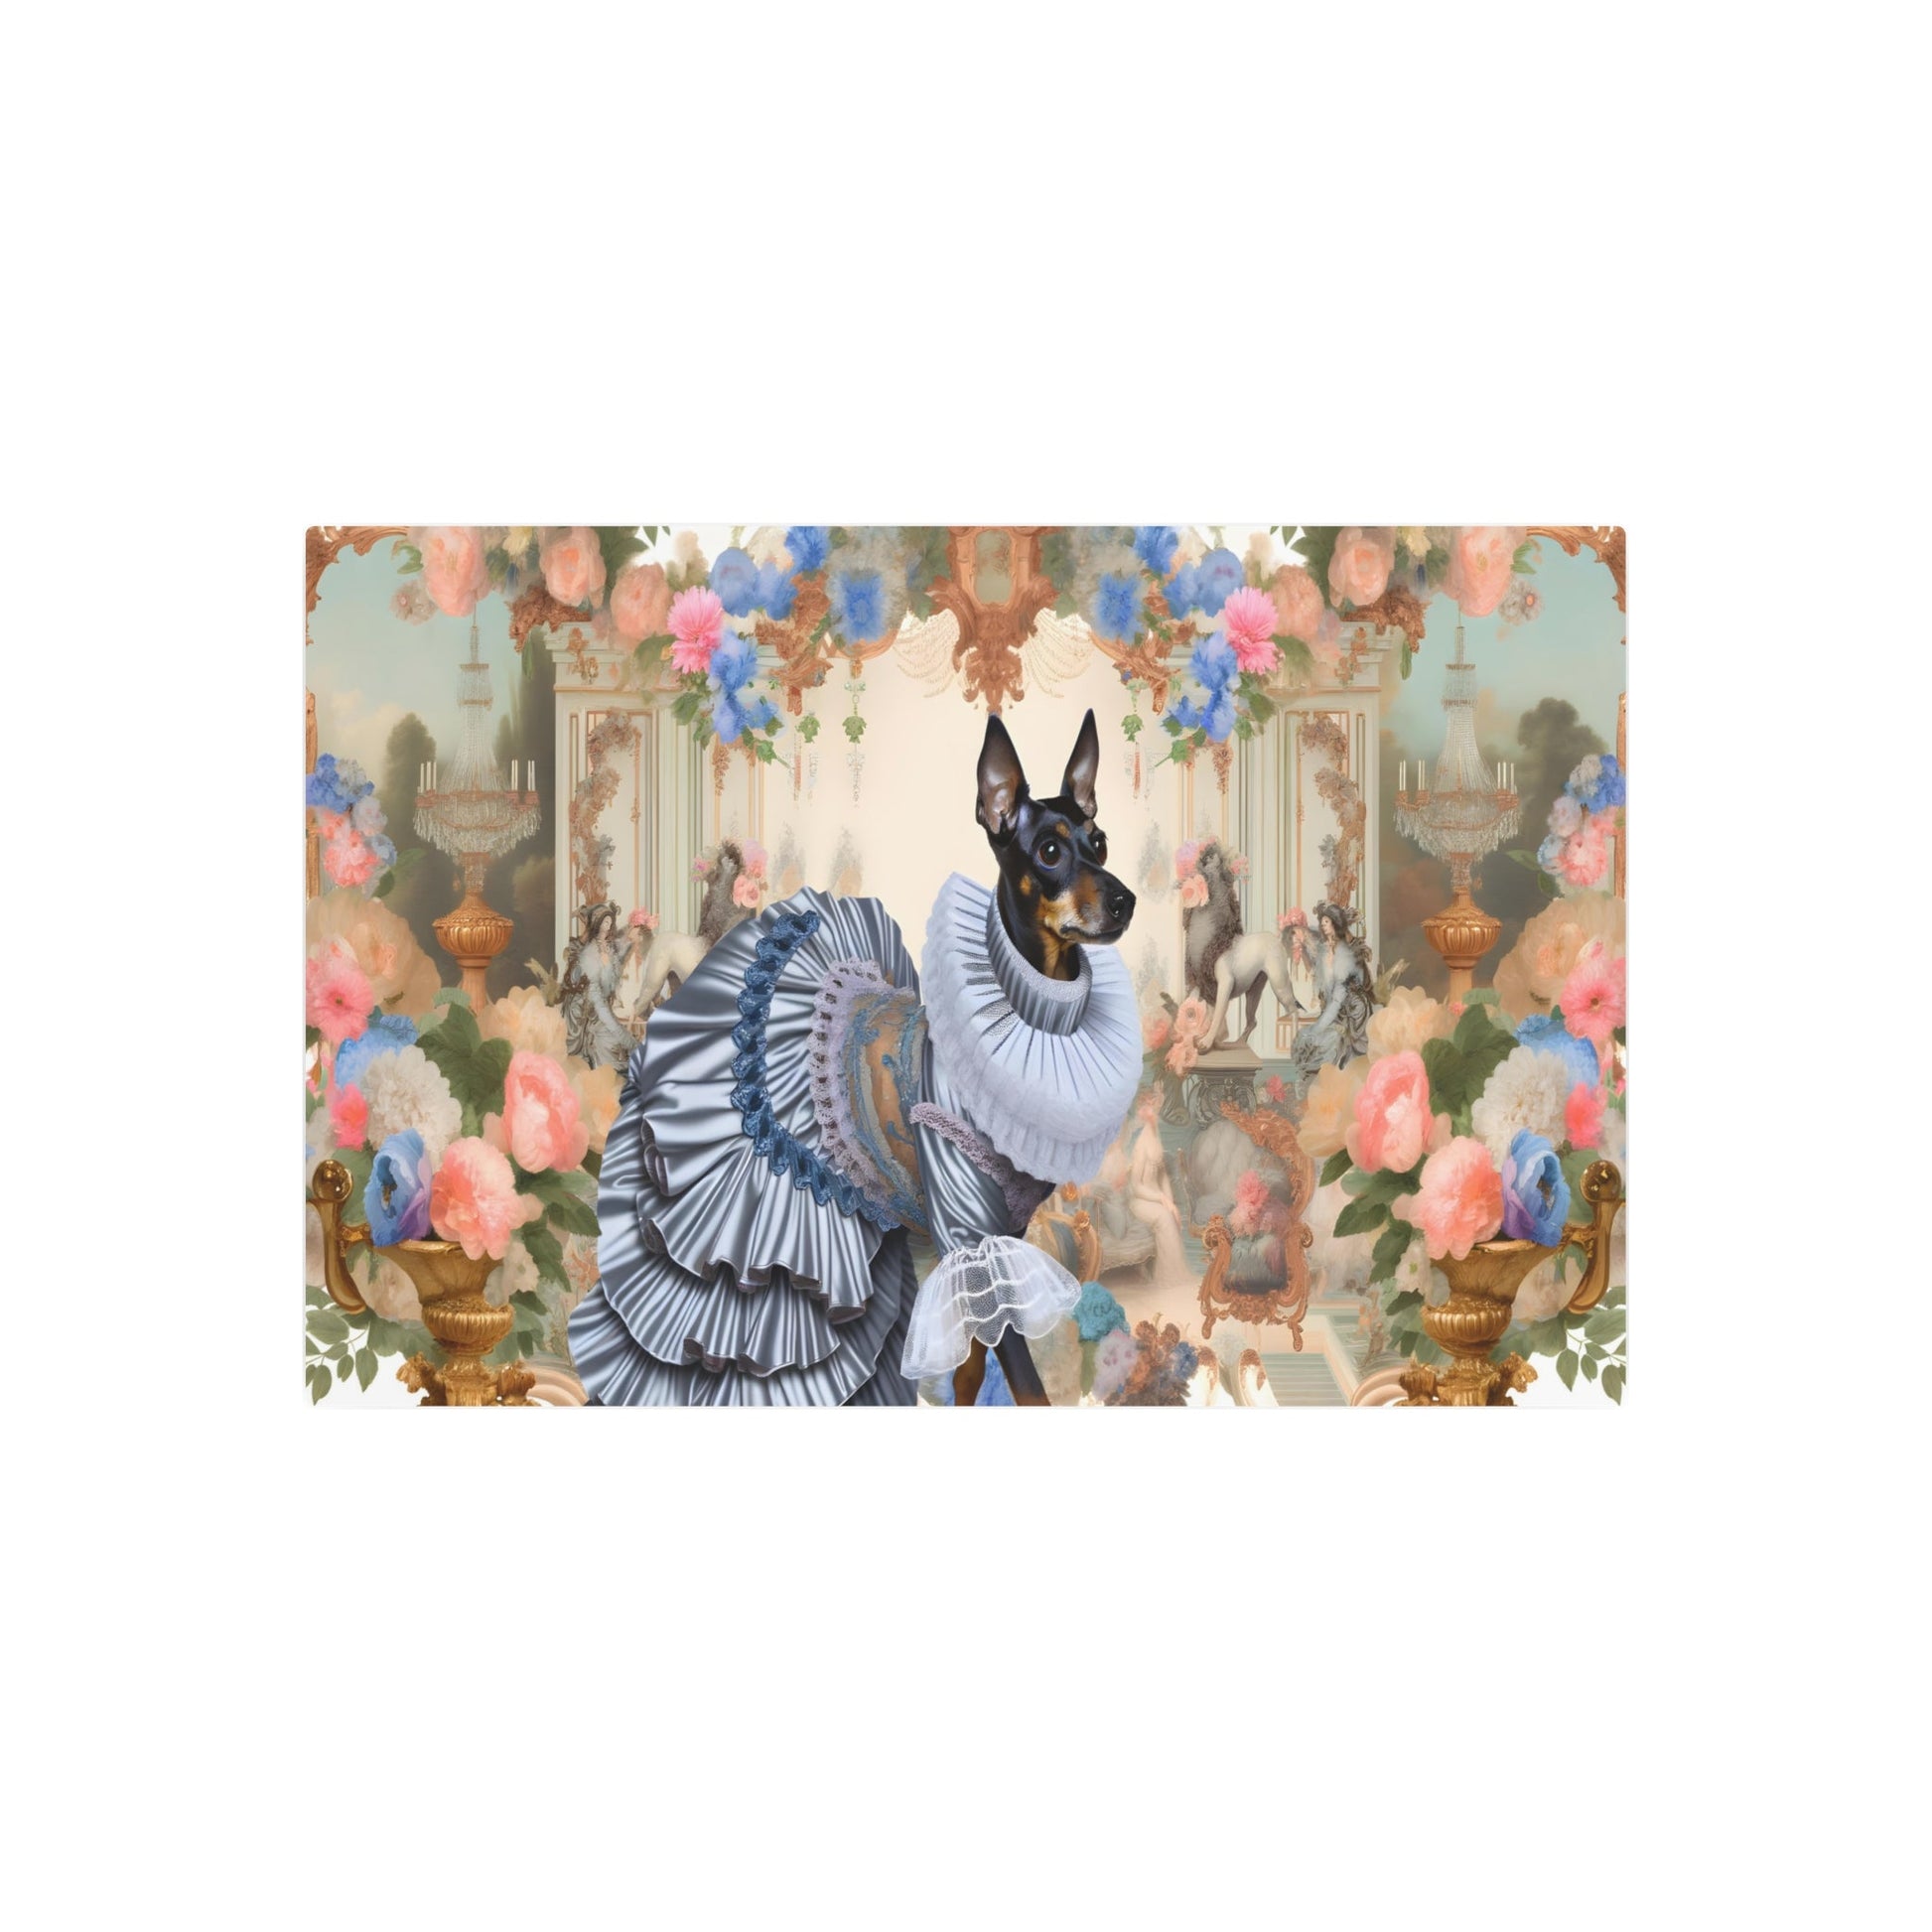 Metal Poster Art | "Rococo-Style Dog Artwork: 18th Century French Aristocratic Elegance in Pastel Colors and Gold Accents under Western - Metal Poster Art 36″ x 24″ (Horizontal) 0.12''